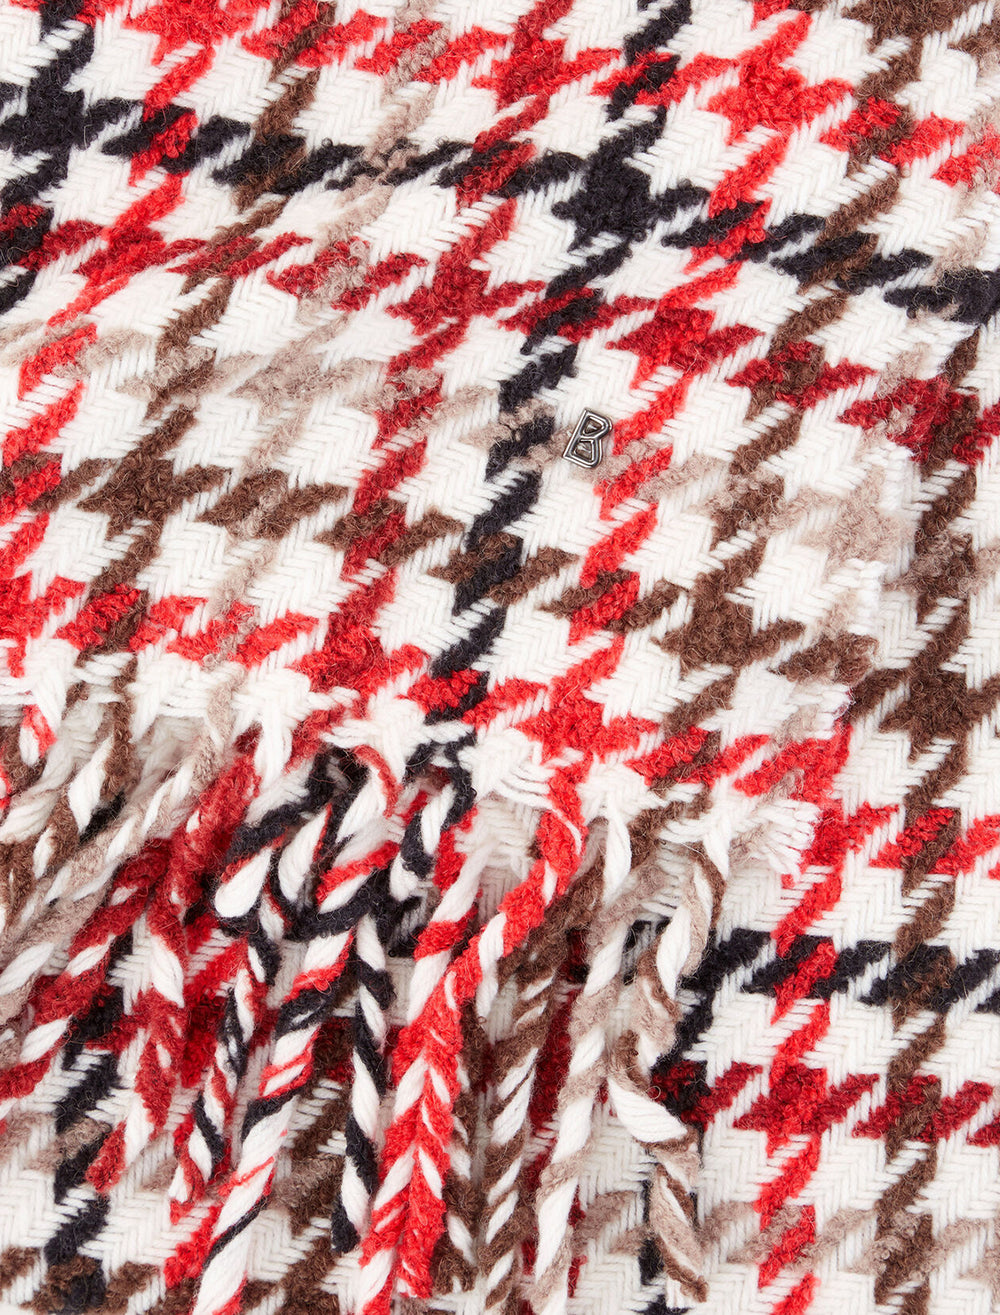 Close-up view of Bogner's jemma scarf in plaid.